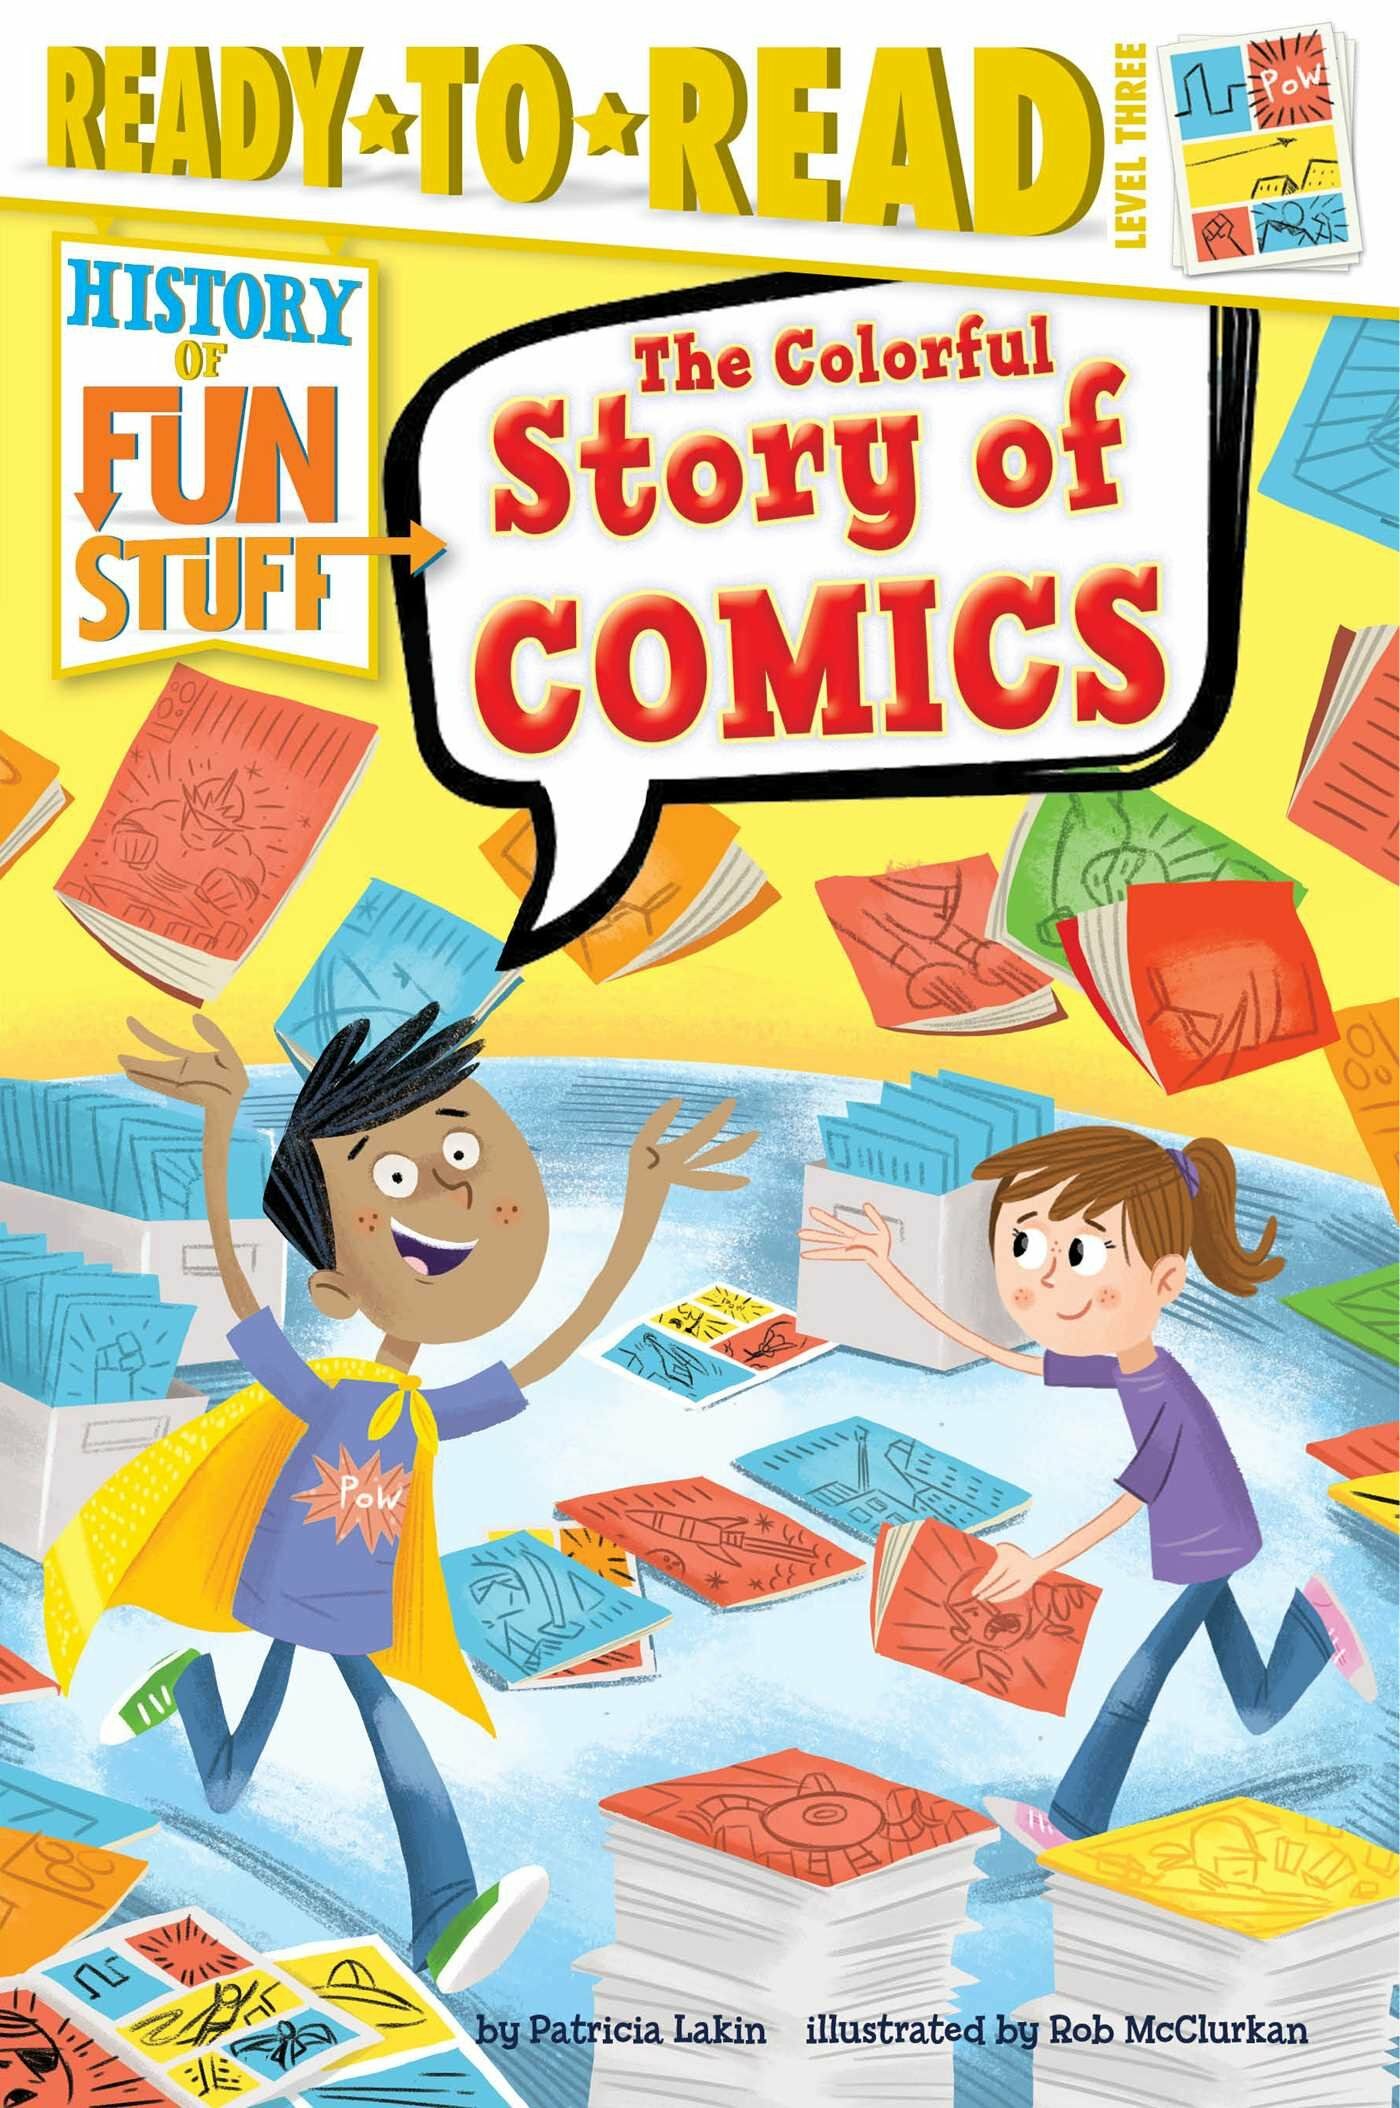 The Colorful Story of Comics: Ready-To-Read Level 3 (Paperback)